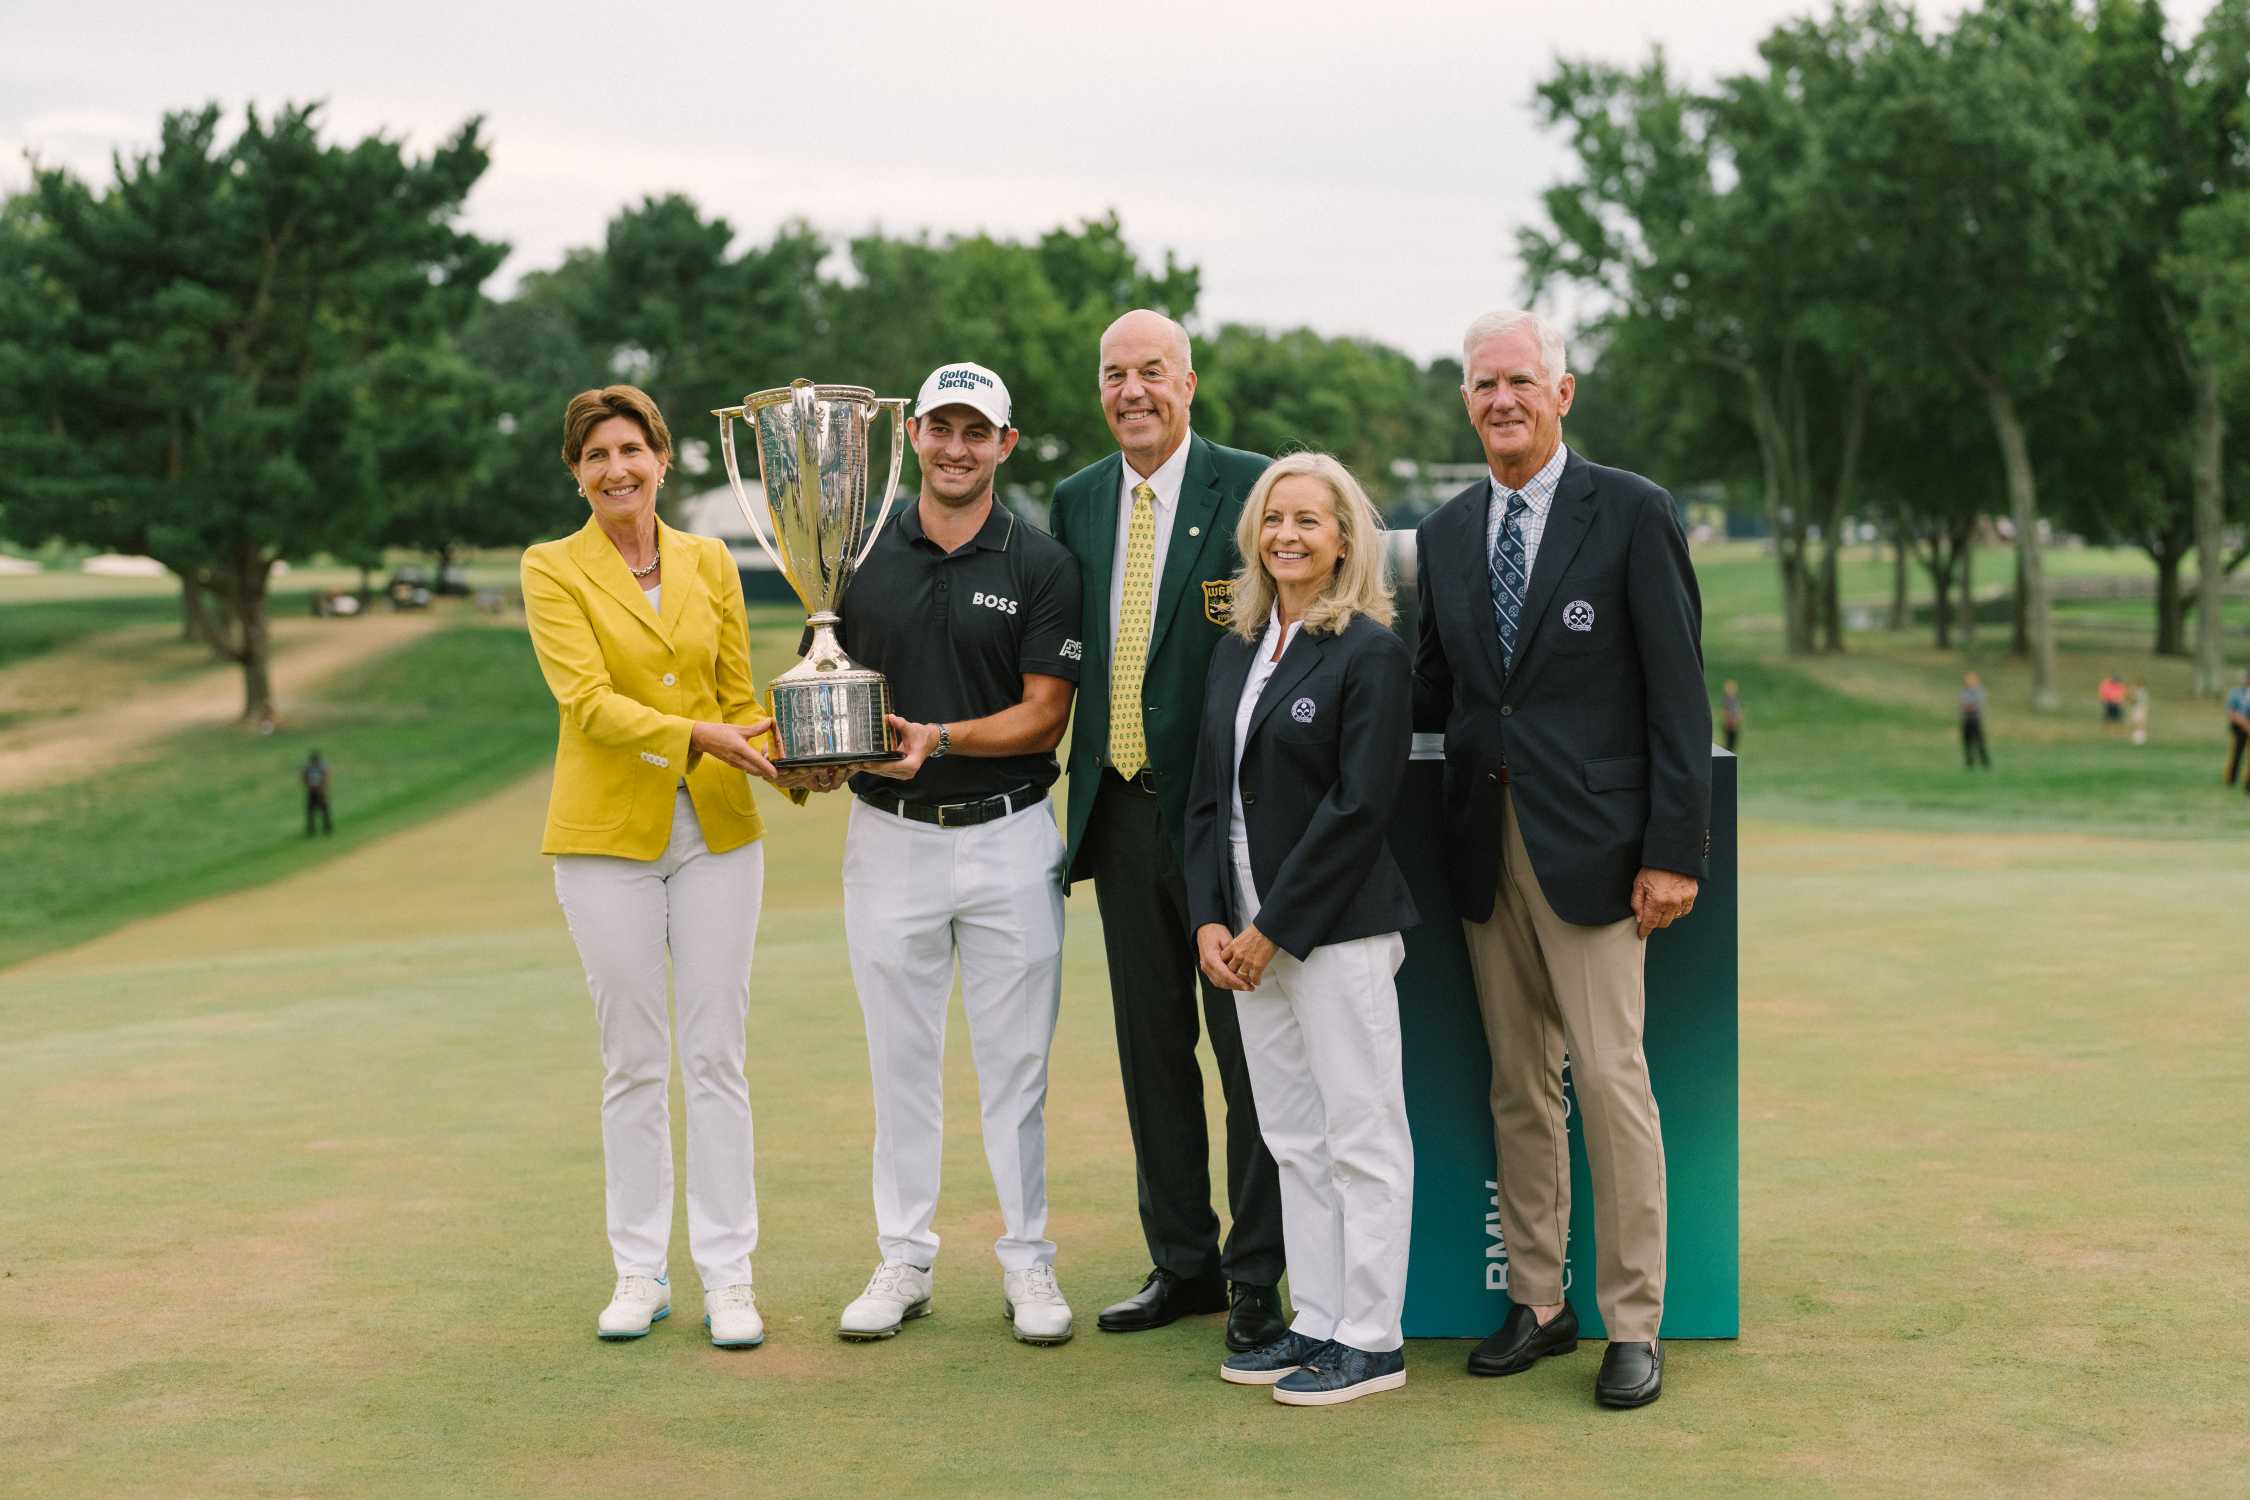 Patrick Cantlay Wins the 2022 BMW Championship at Wilmington Country Club to Become First Repeat Winner.